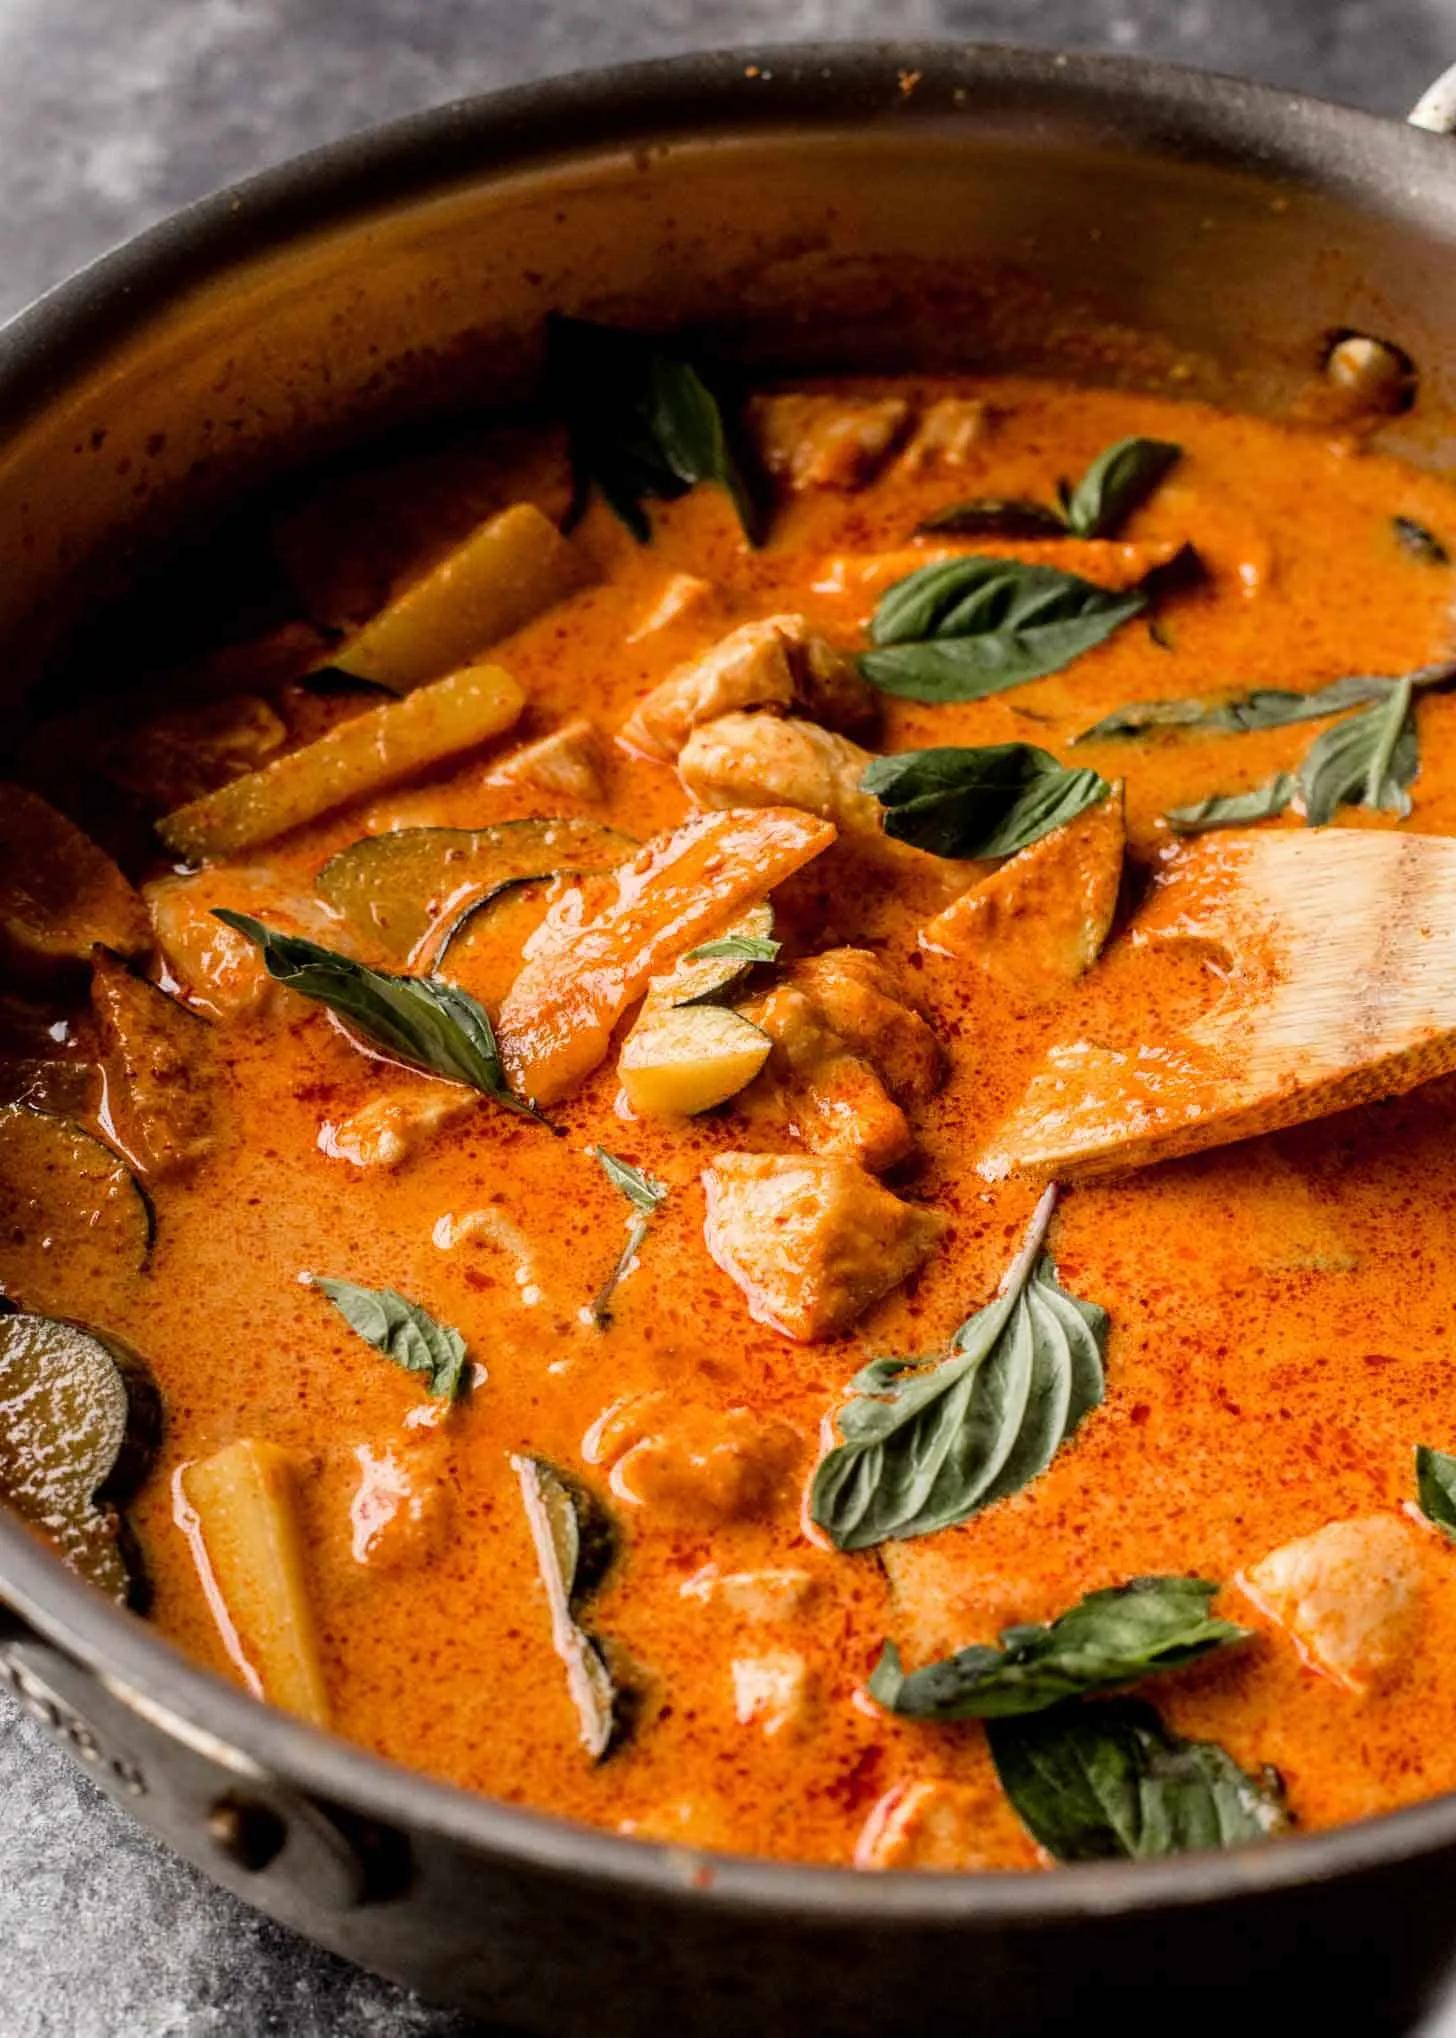 Thai Red Curry with Chicken - Inquiring Chef